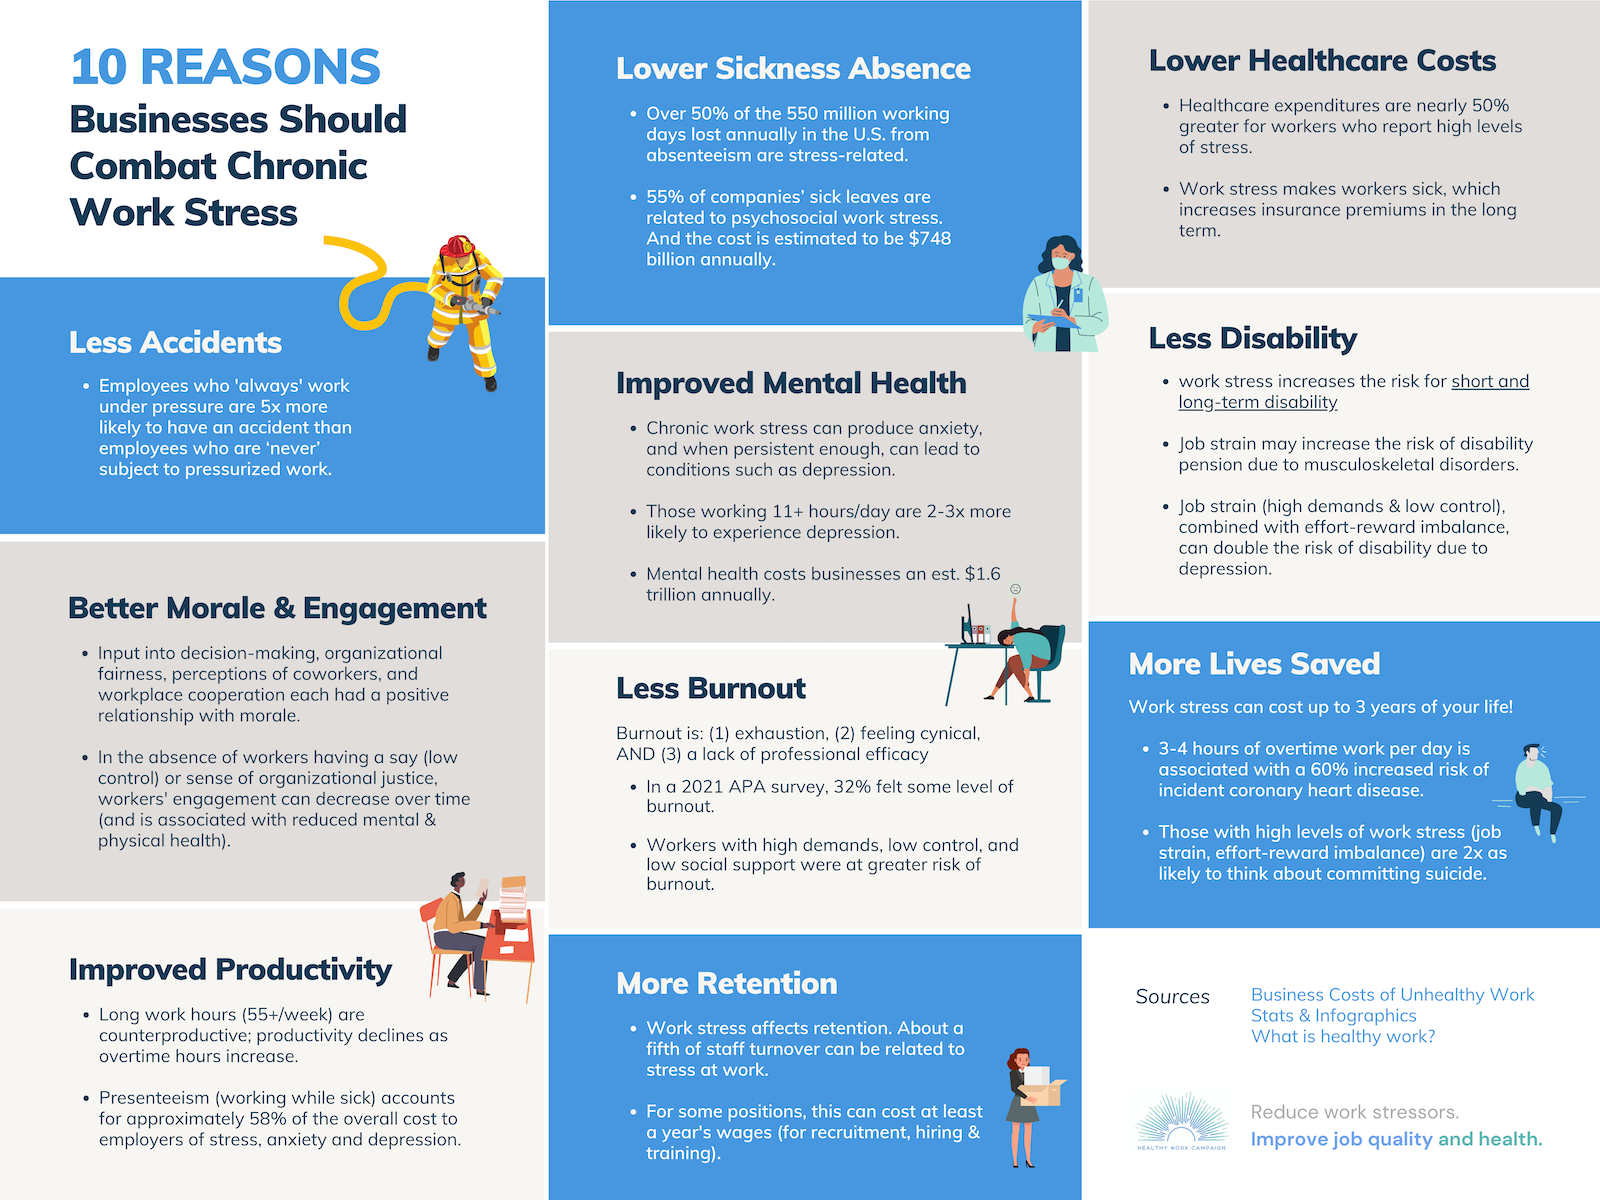 10 Reasons Businesses Should Combat Chronic Work Stress - Infographic